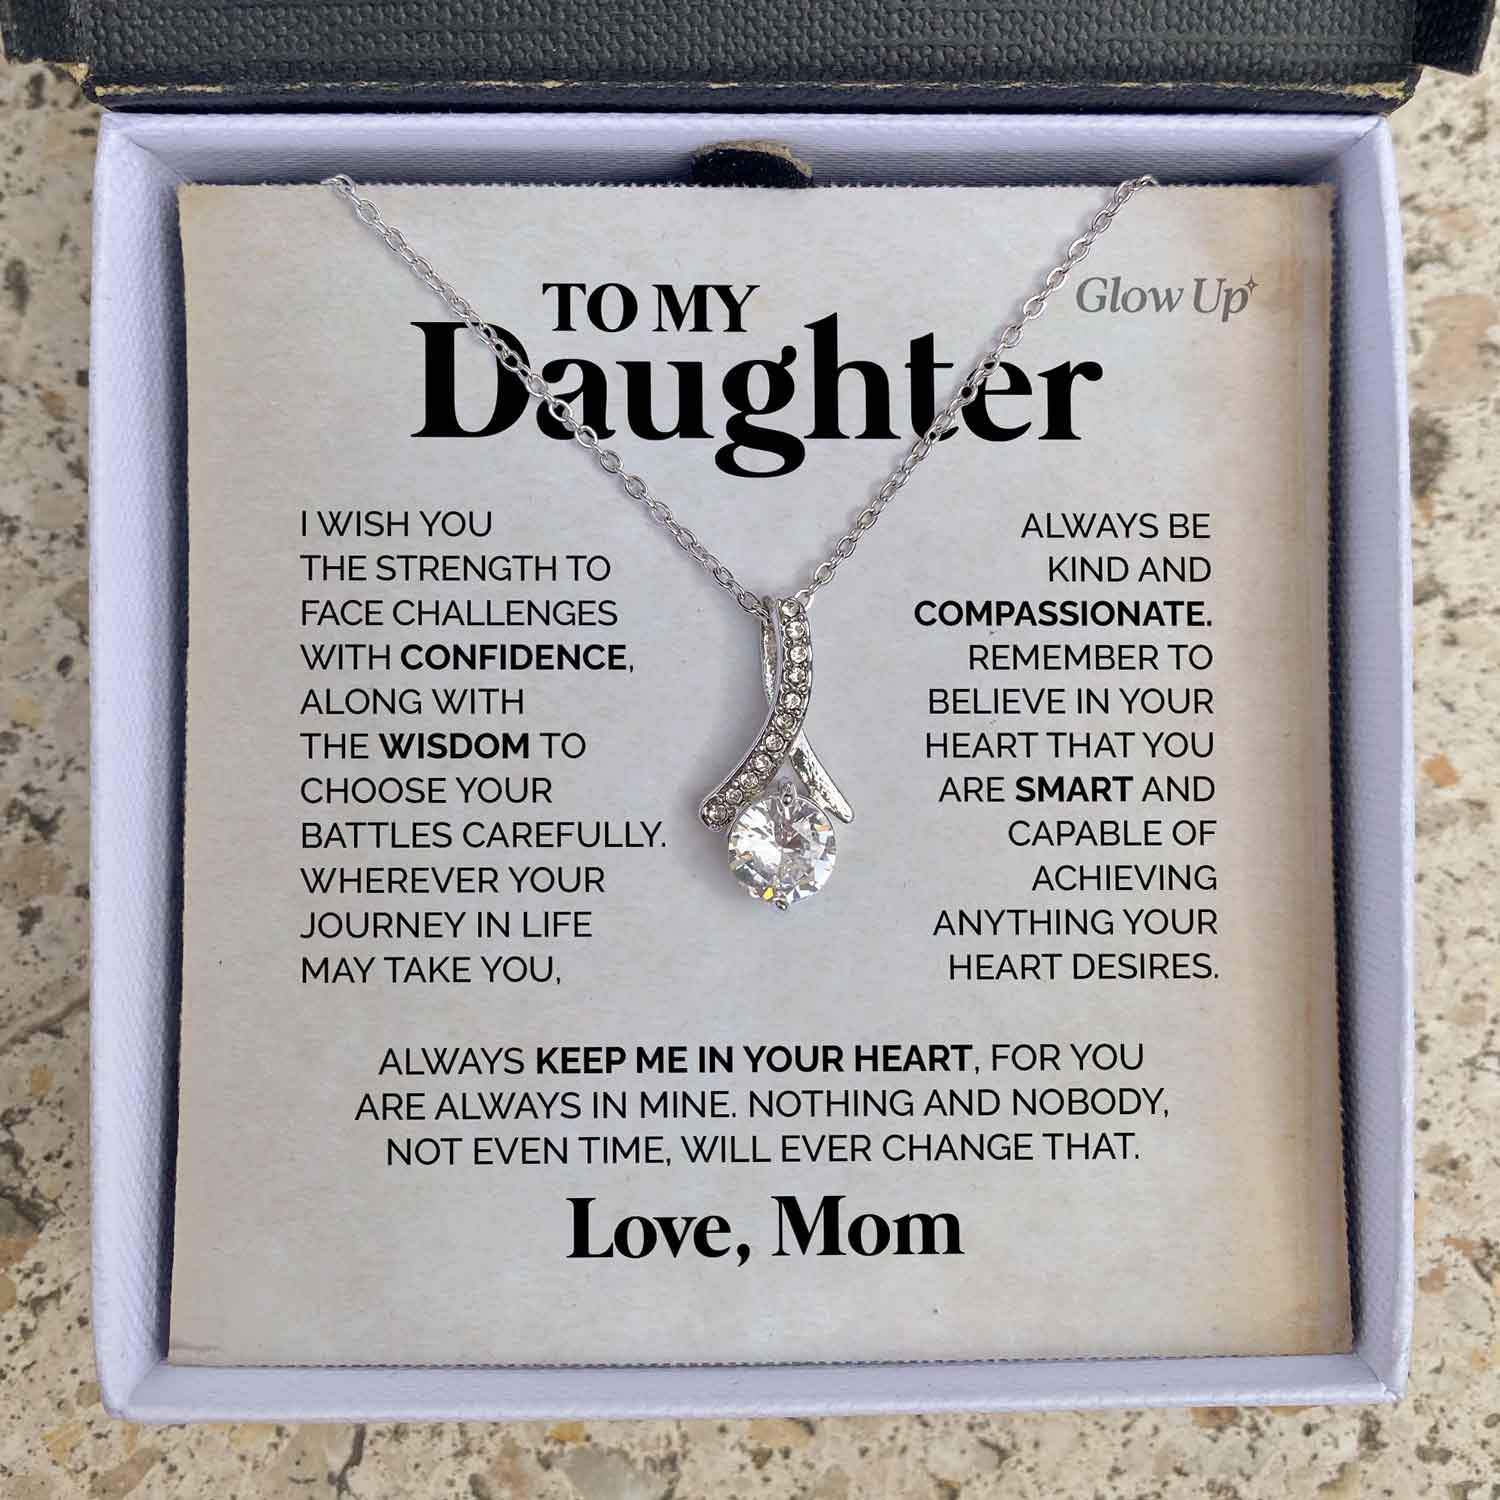 ShineOn Fulfillment Jewelry 14K White Gold Finish / Two-toned Box To My Daughter - Keep me in your heart - Ribbon necklace